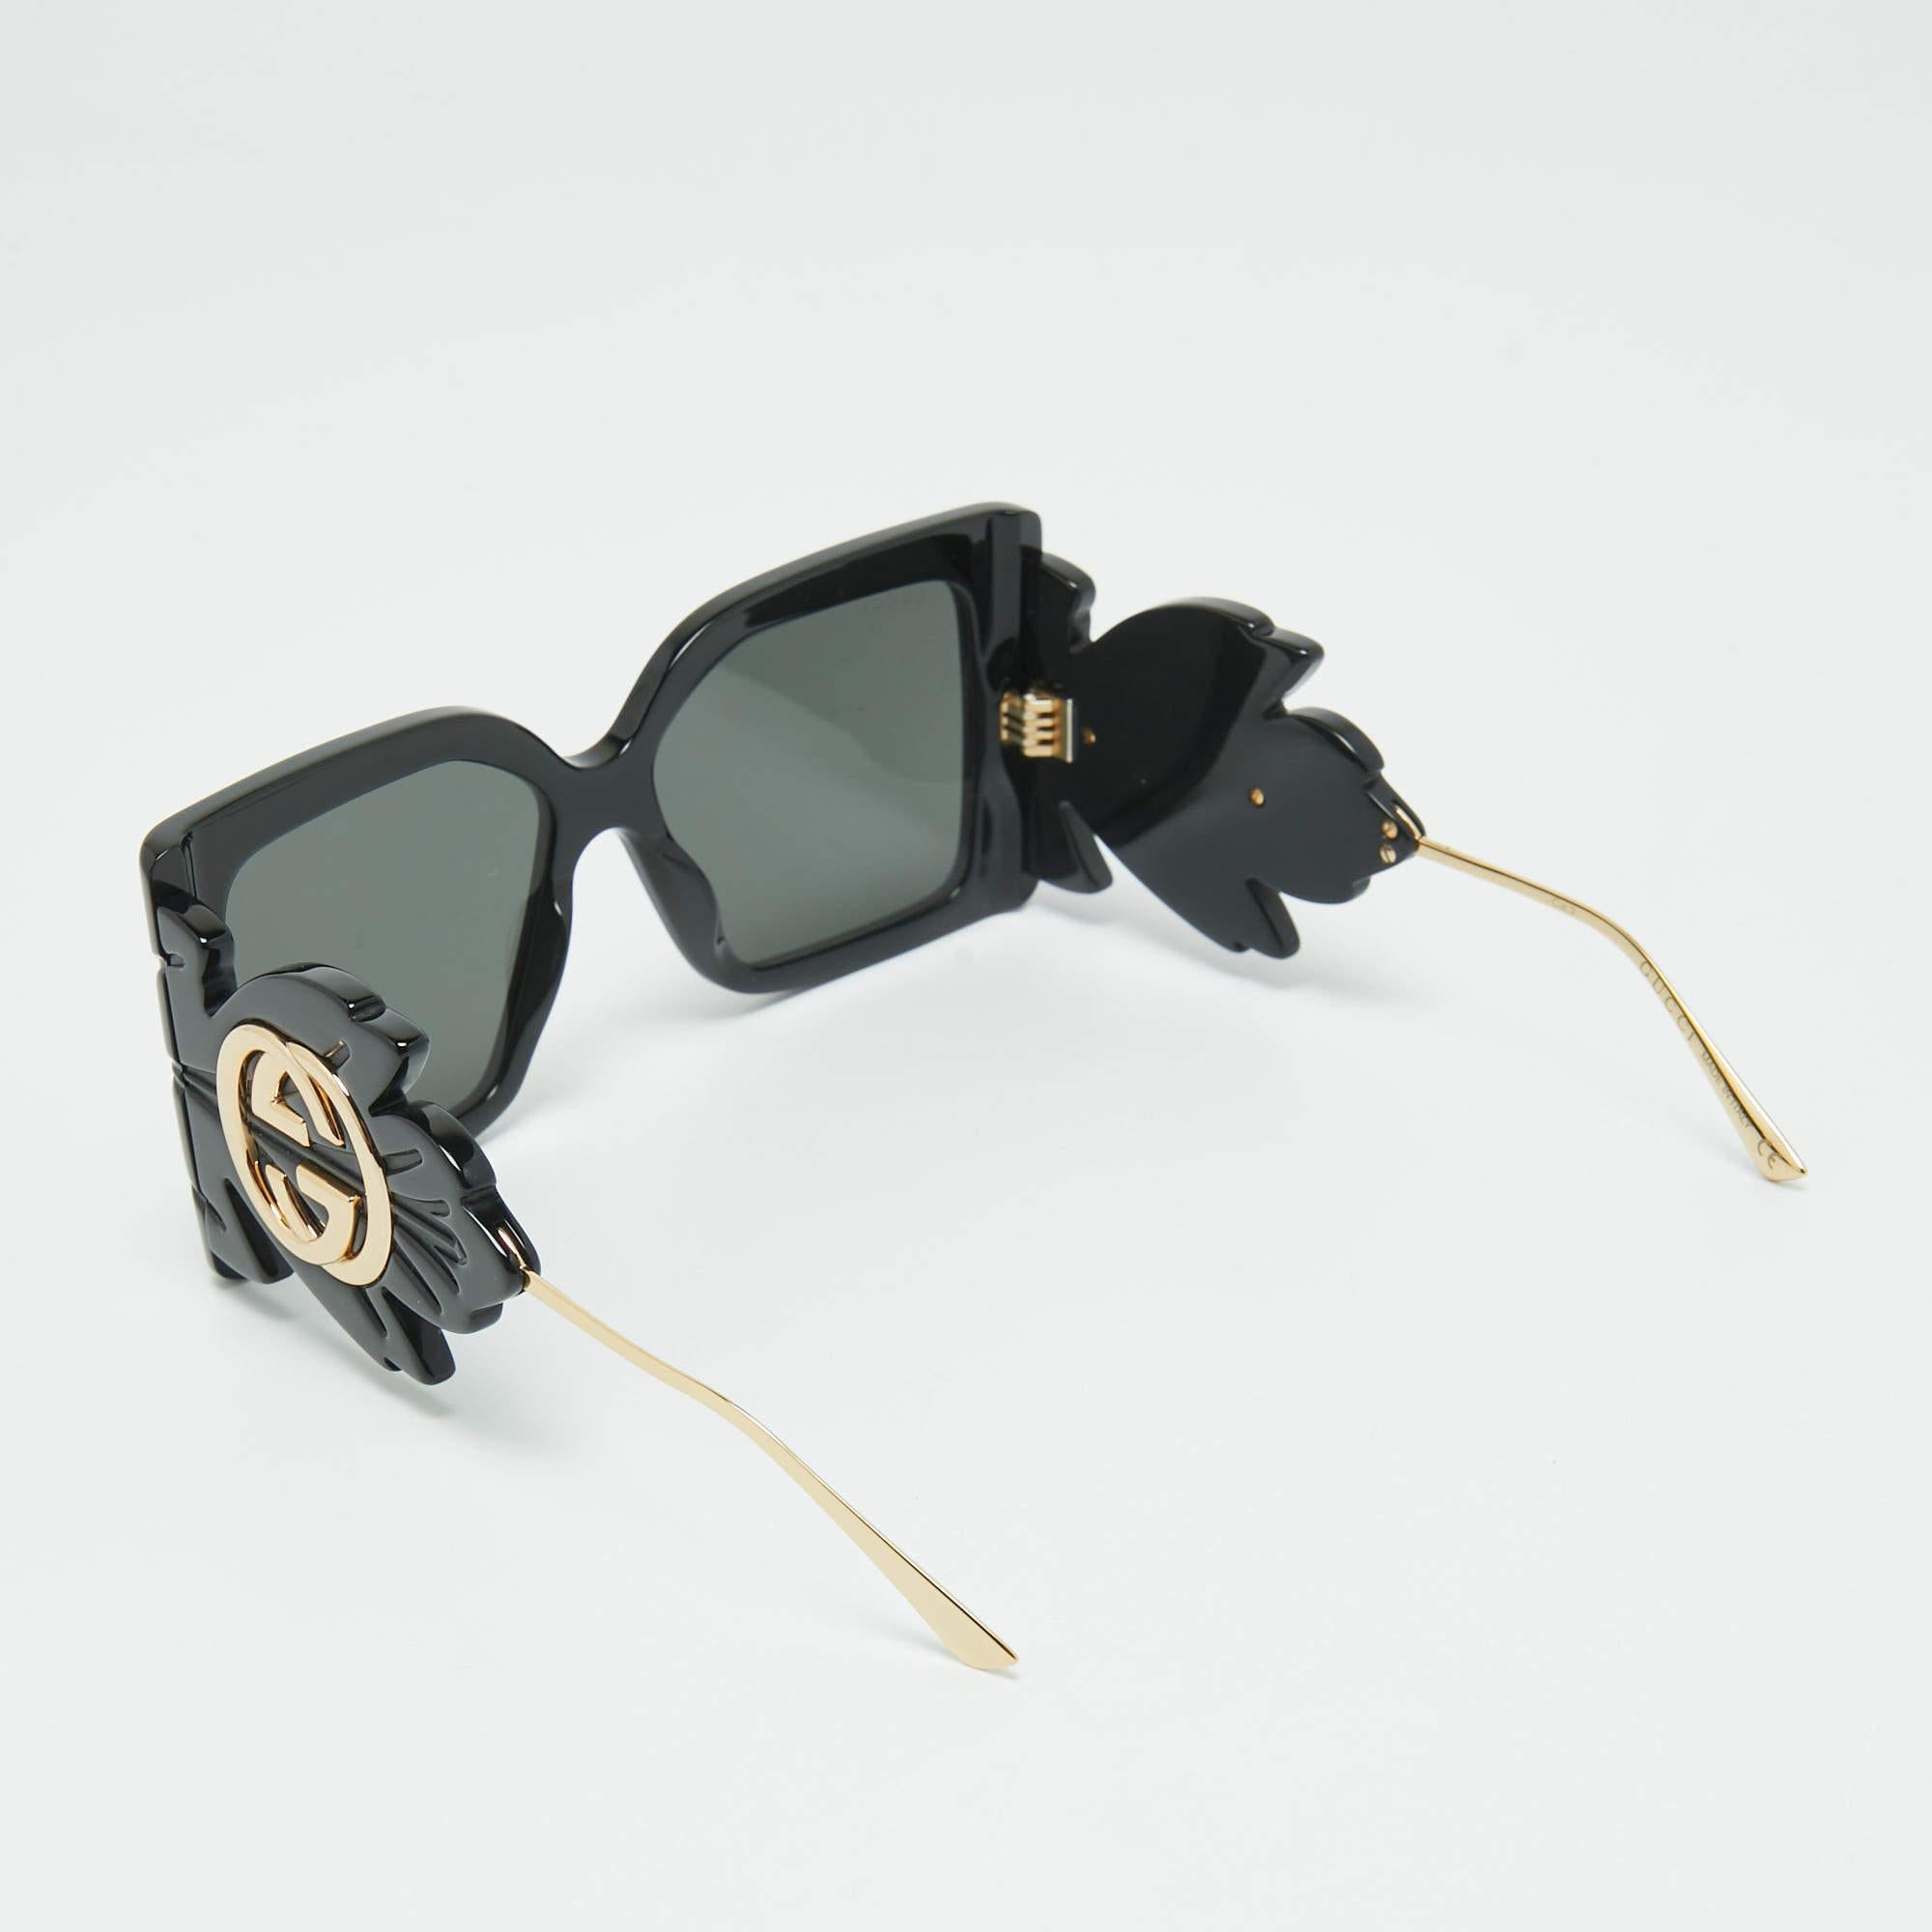 A statement pair of sunglasses from Gucci will surely make a prized buy. Featuring a trendy frame and lenses meant to protect your eyes, the sunglasses are ideal for all-day wear.

